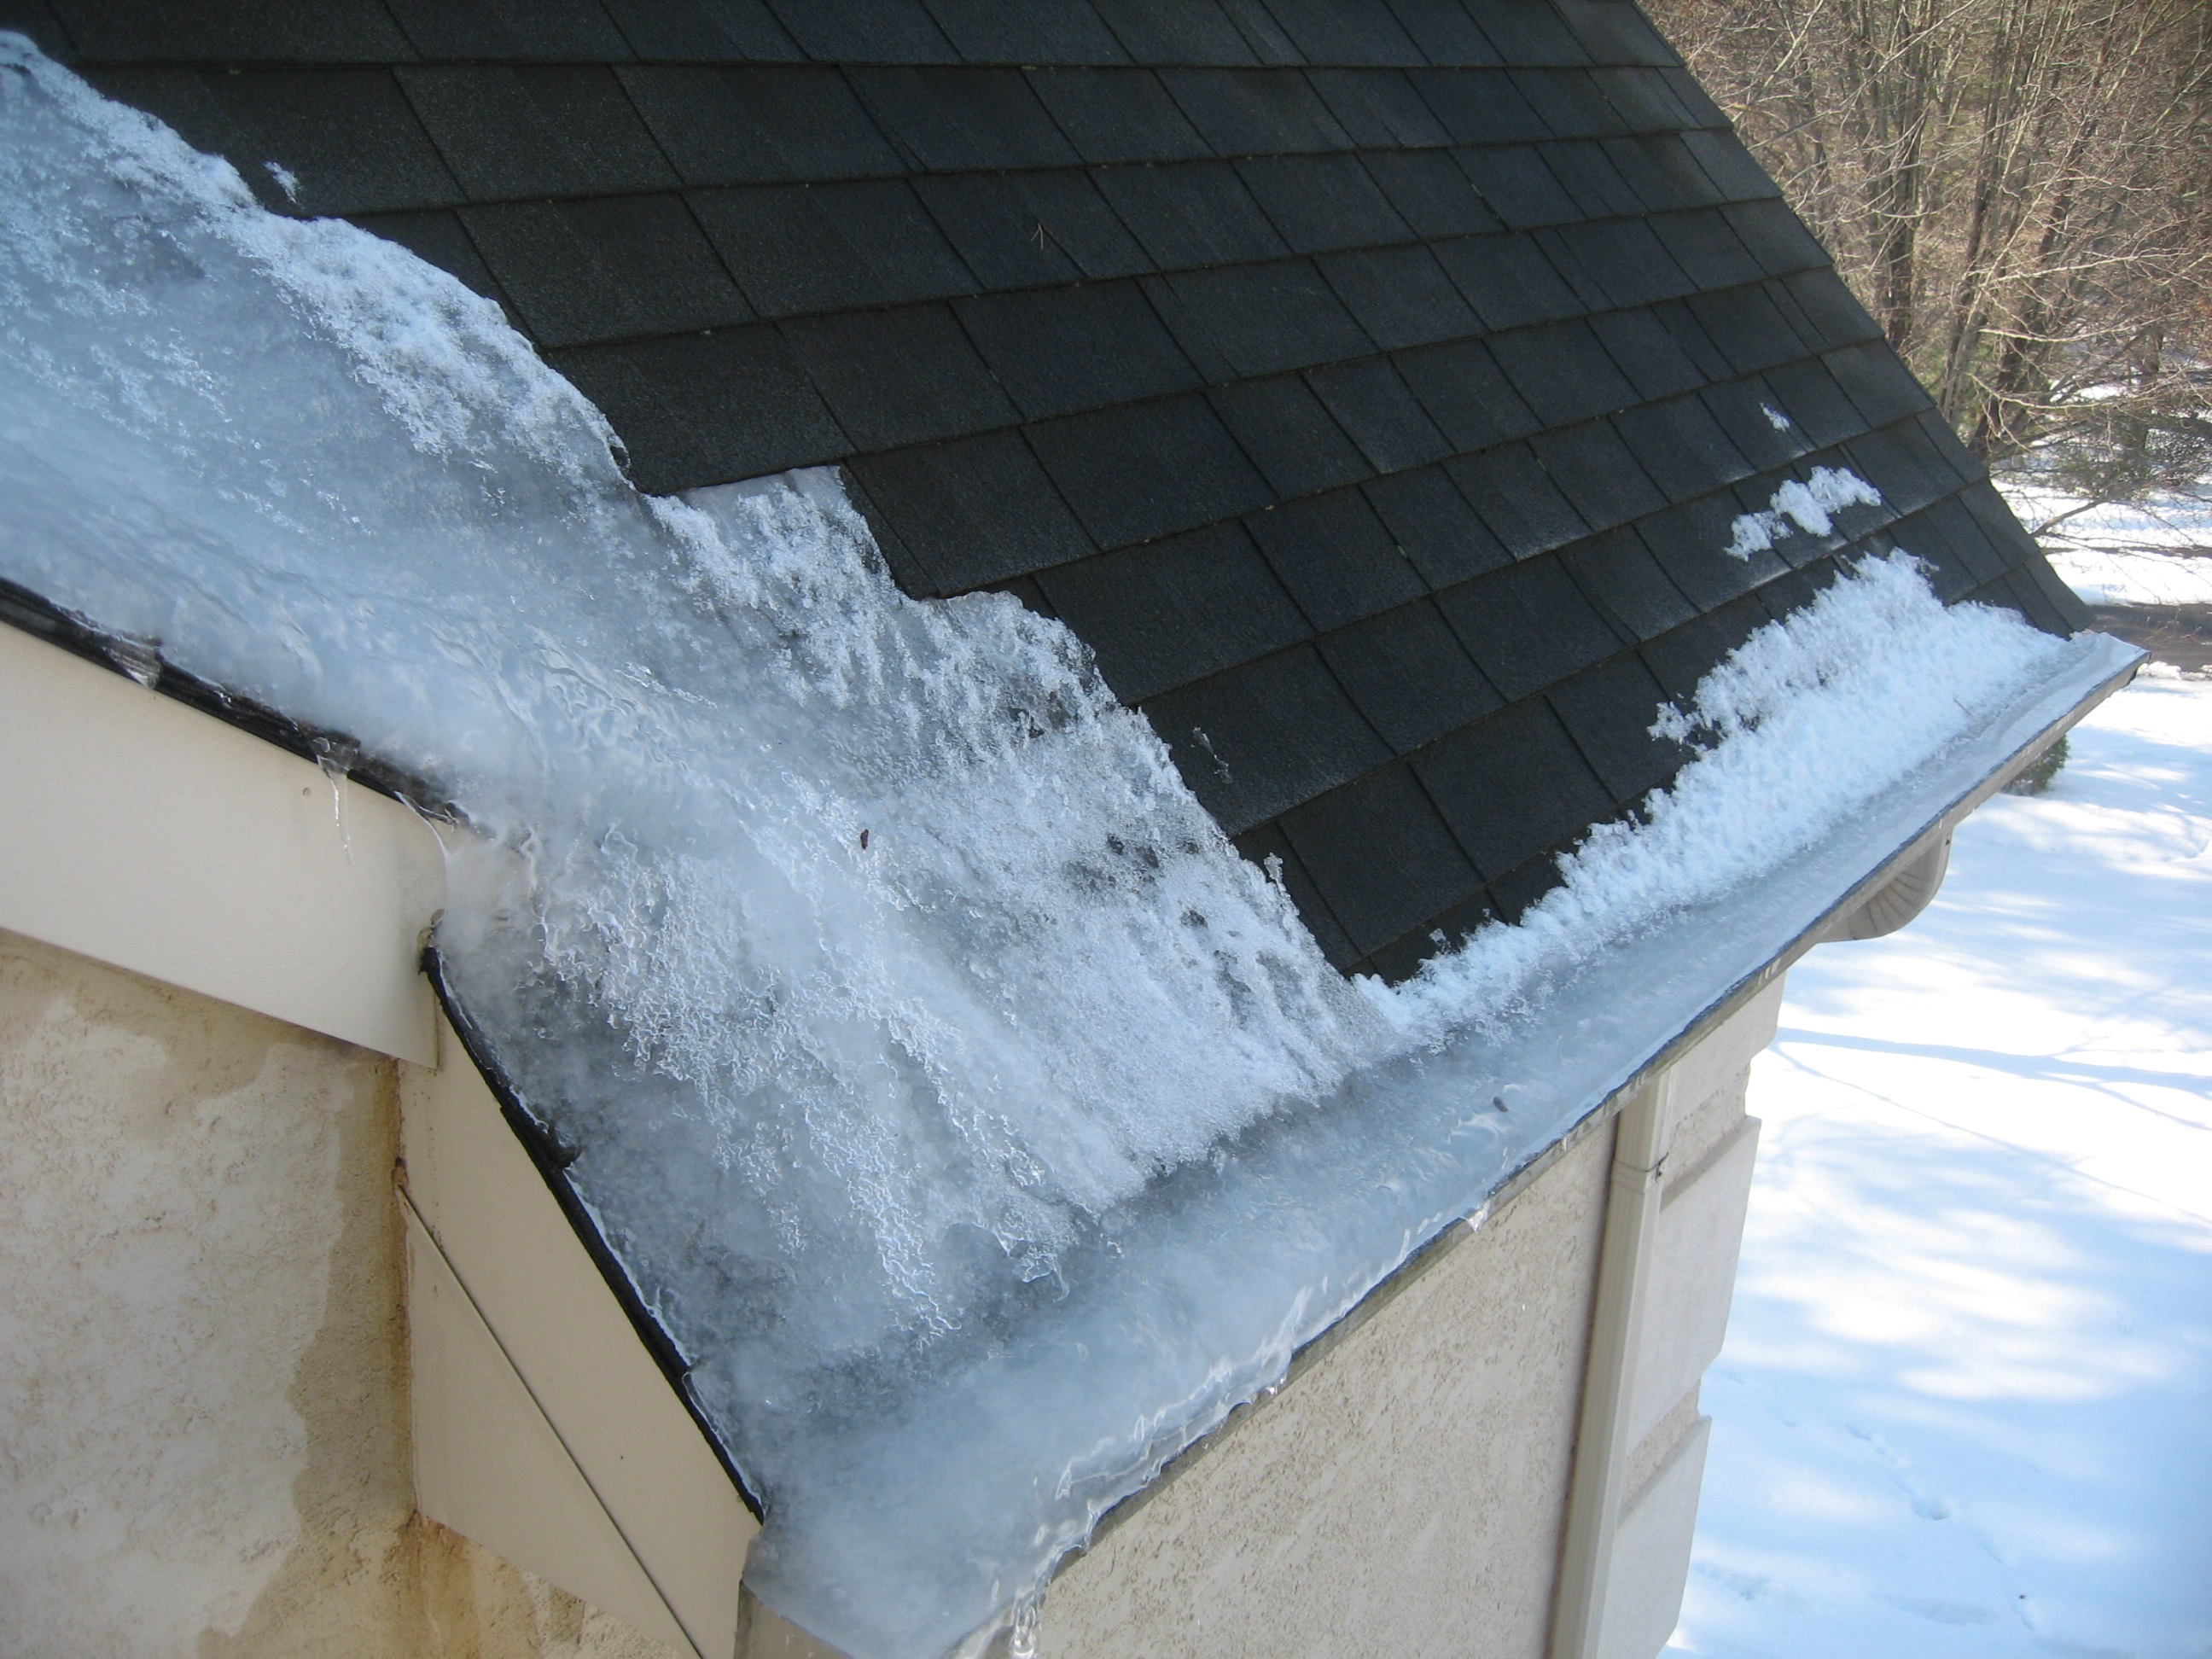 Winter Damage Roof Leaks Caused By Ice Damming South Jersey Roofing Marlton Roofers